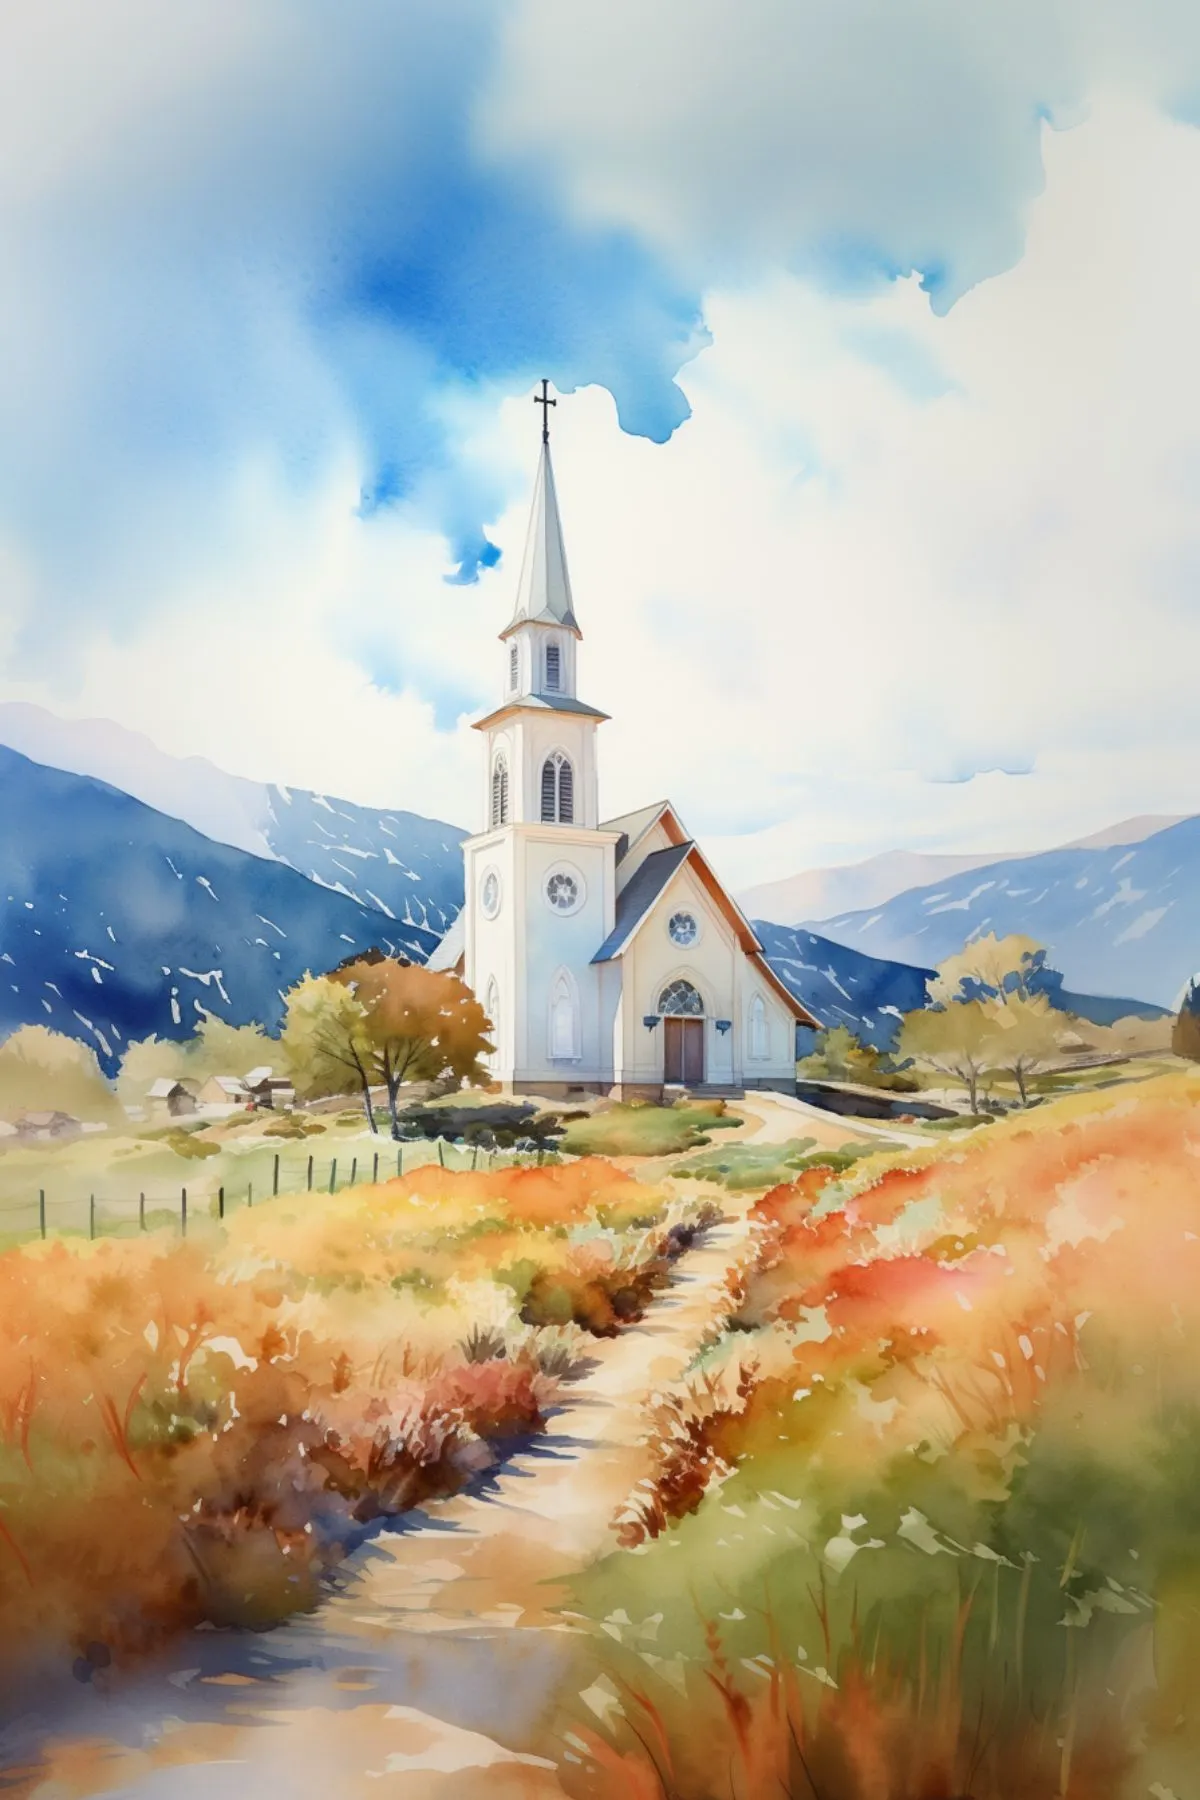 watercolor image of a church in the plains with beautiful mountains in the background